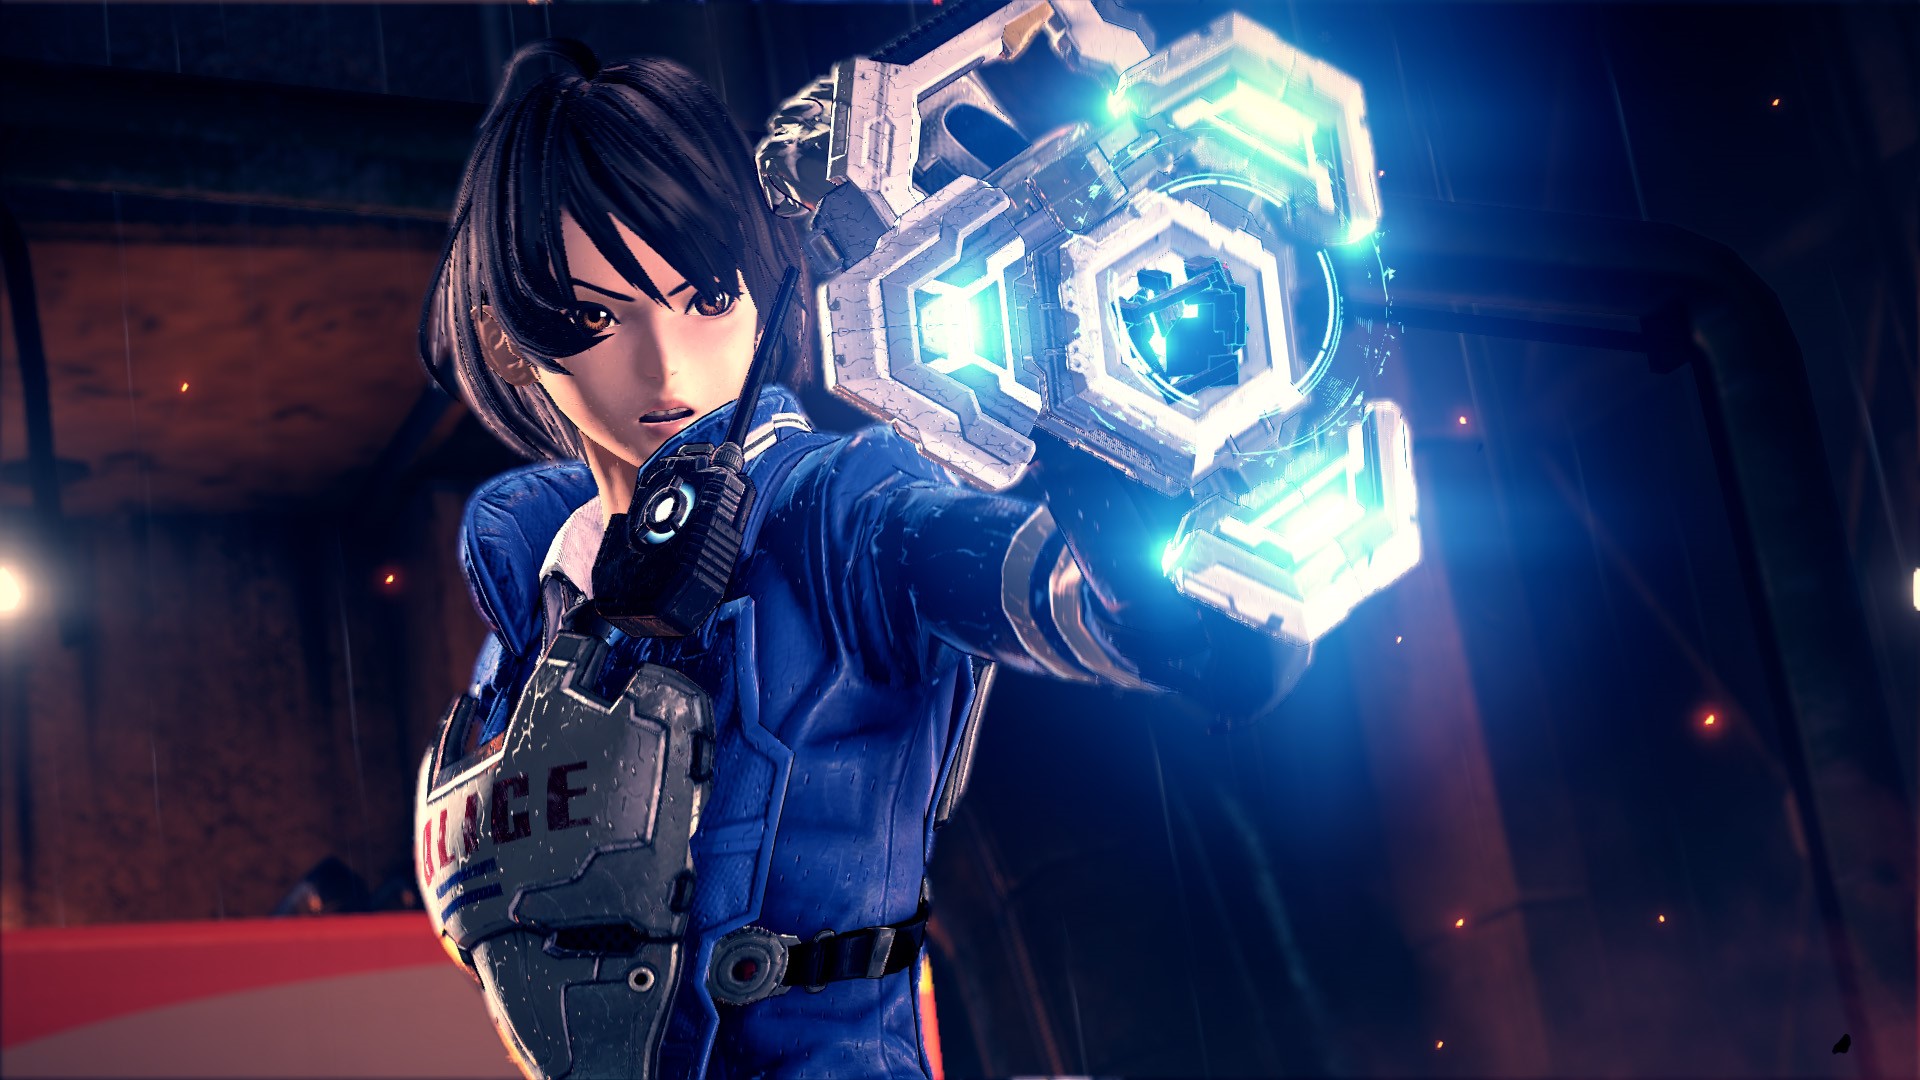 Astral Chain Archives - Nintendo Everything1920 x 1080